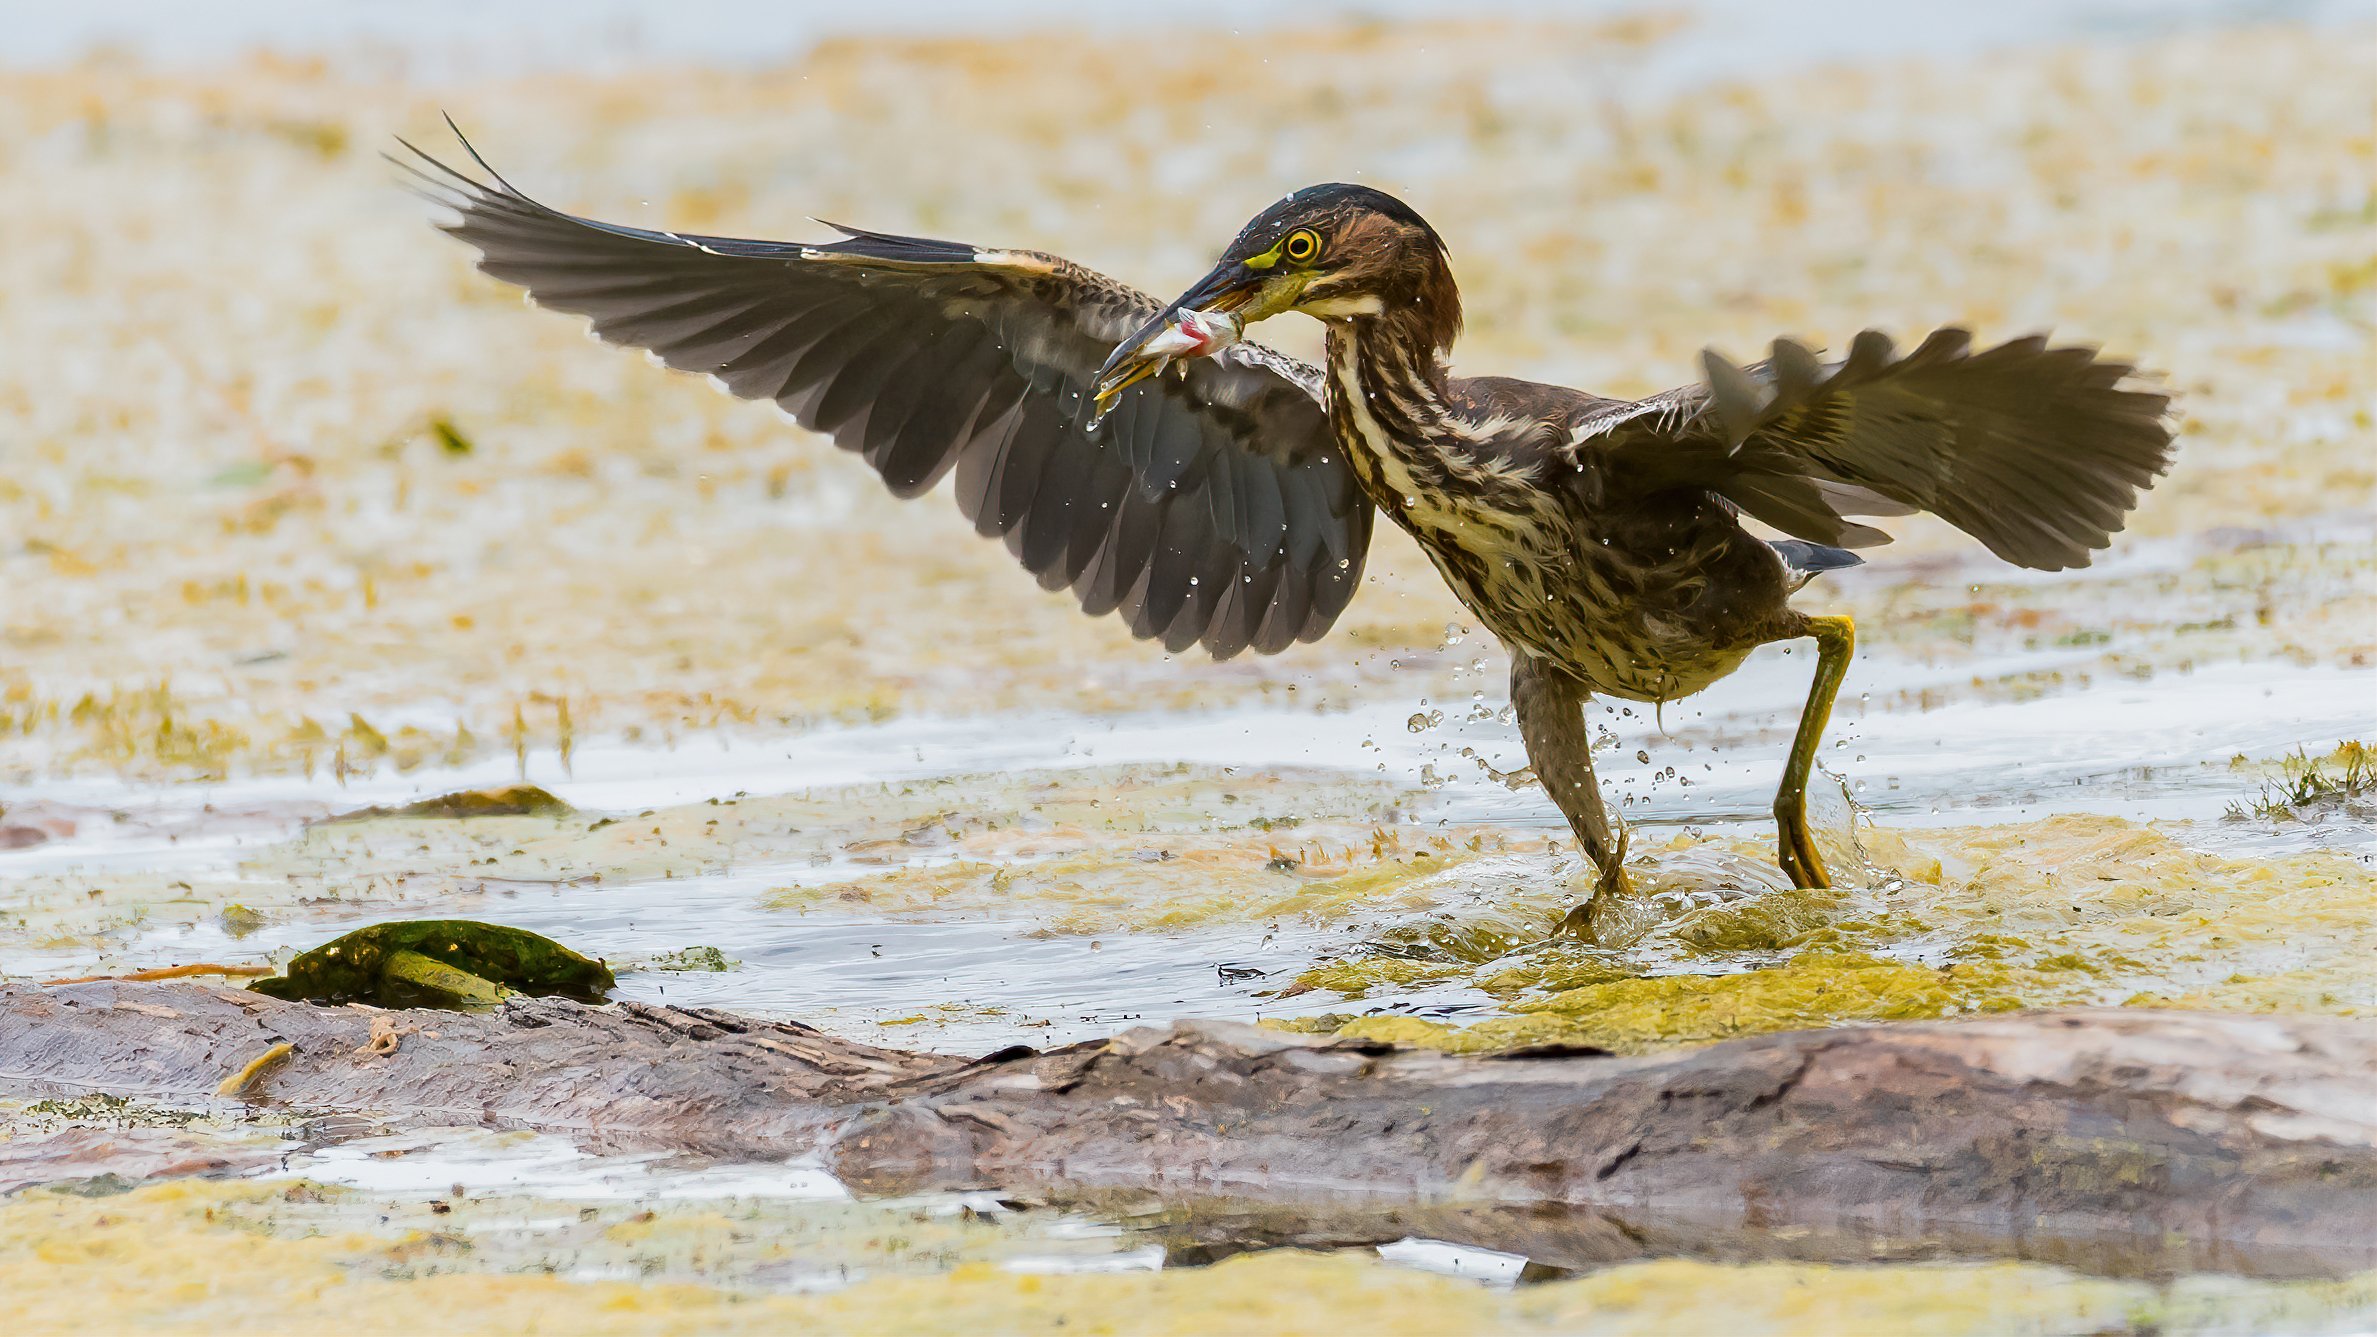 04 A green heron anxiously heads towards shore with its catch.jpg